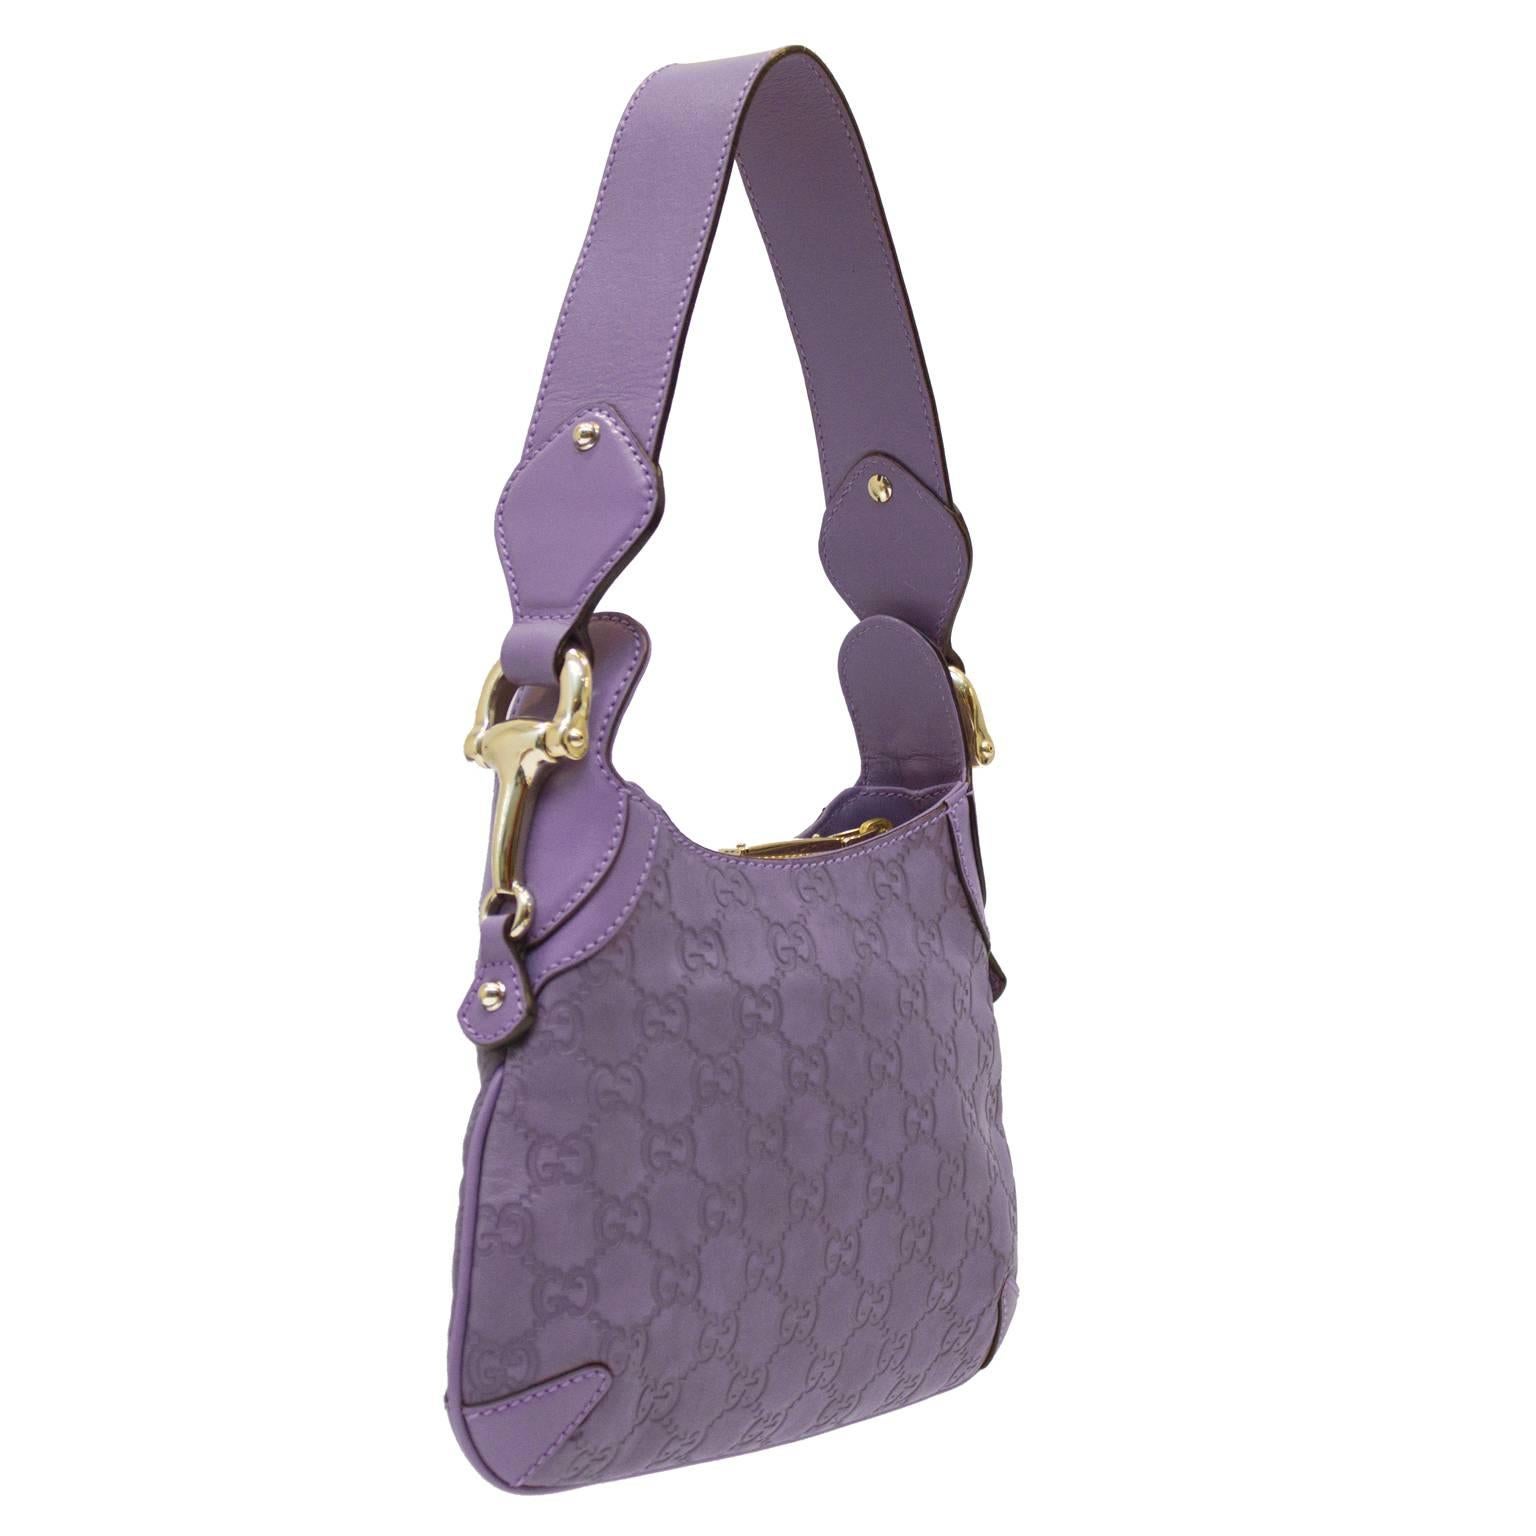 Petit lilac leather hobo handbag from the early 2000's. The wide top handle strap can be worn over the shoulder and the bag is blind stamped with the Gucci monogram pattern. Detailed with silvertone horsebit hardware. The interior is lined in a